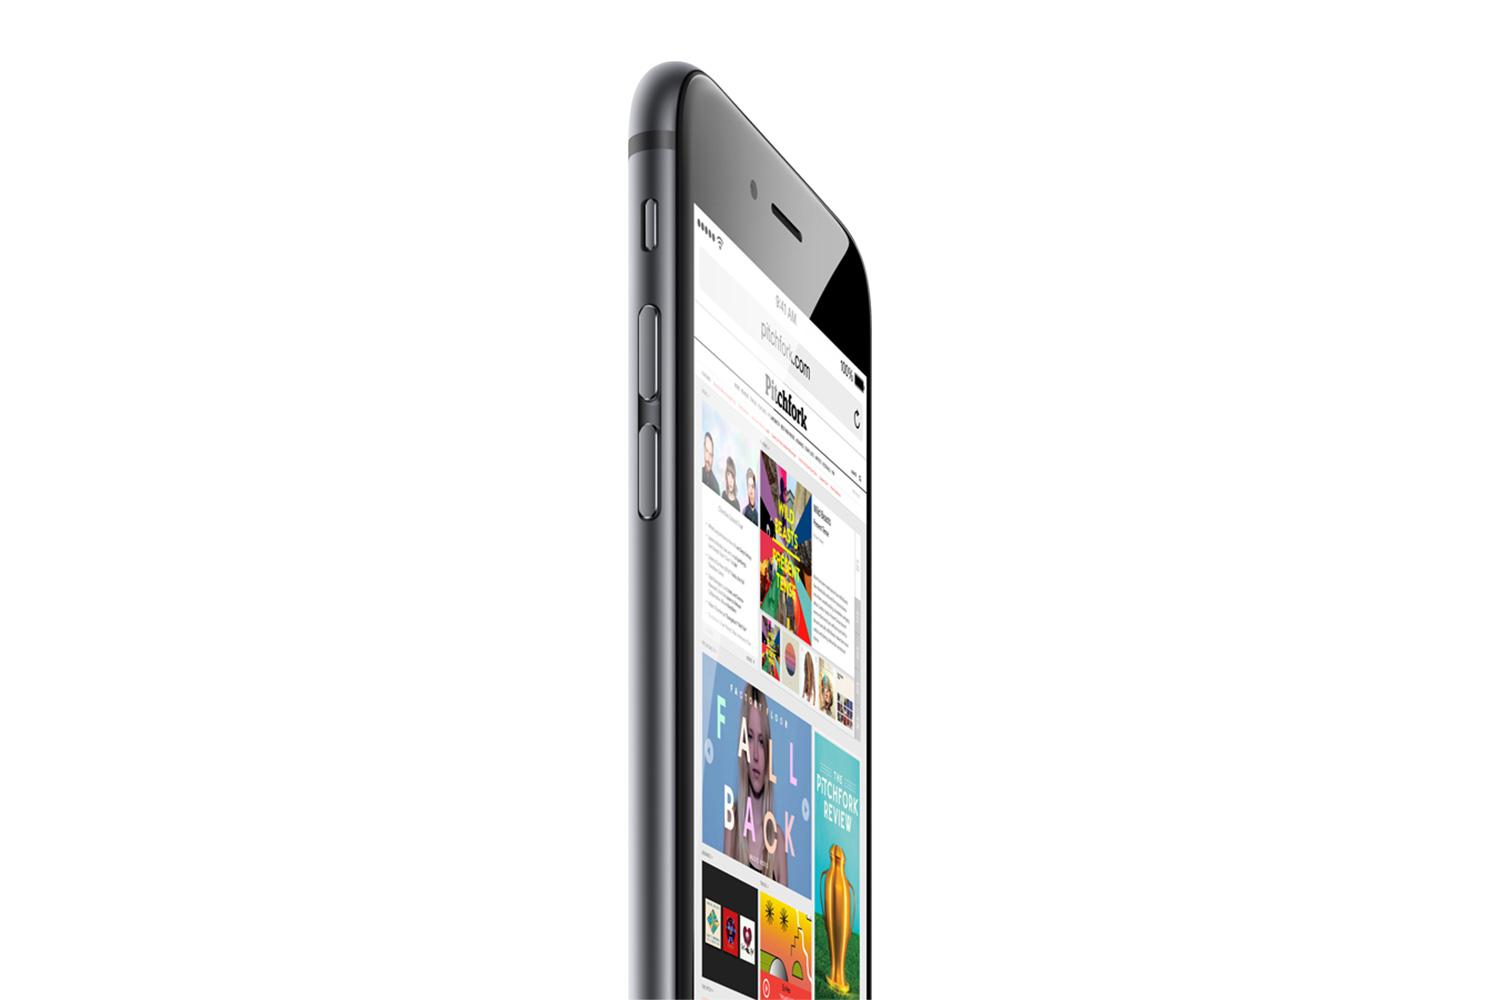 iphone 6 air features release rumors right side macro